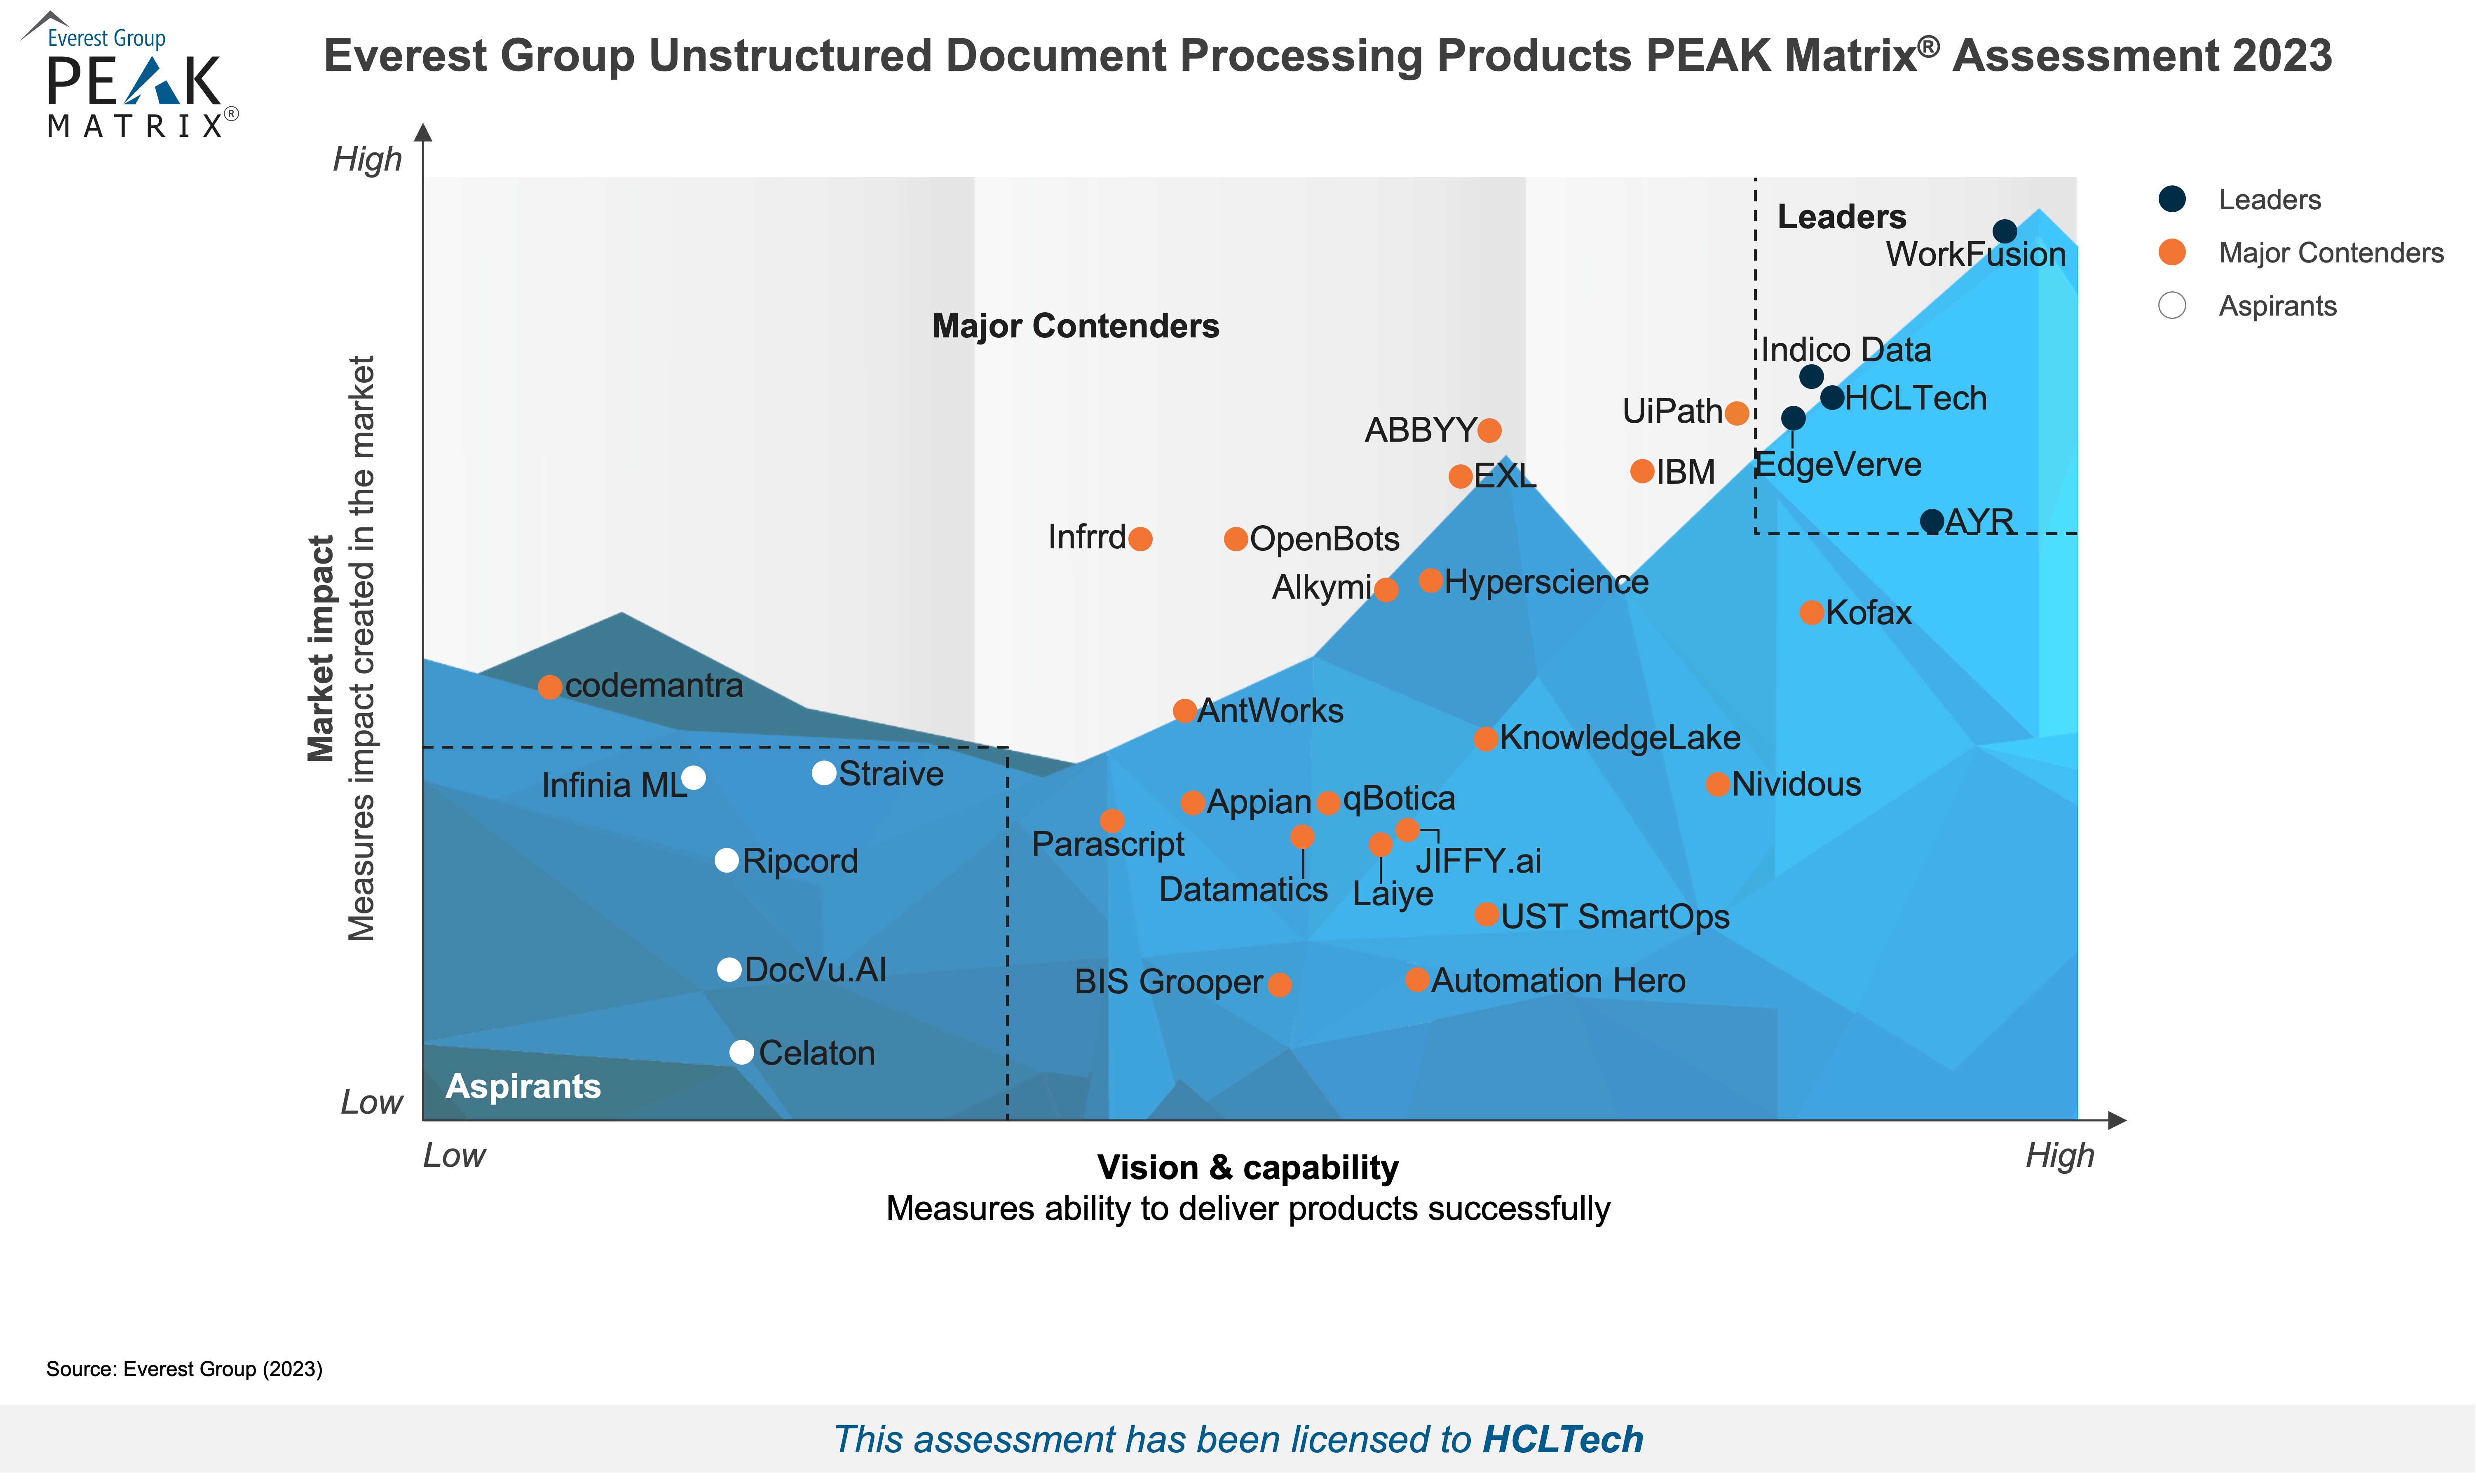 HCLTech Positioned as a Leader in Everest Group’s Unstructured Document Processing PEAK Matrix® Assessment 2023.